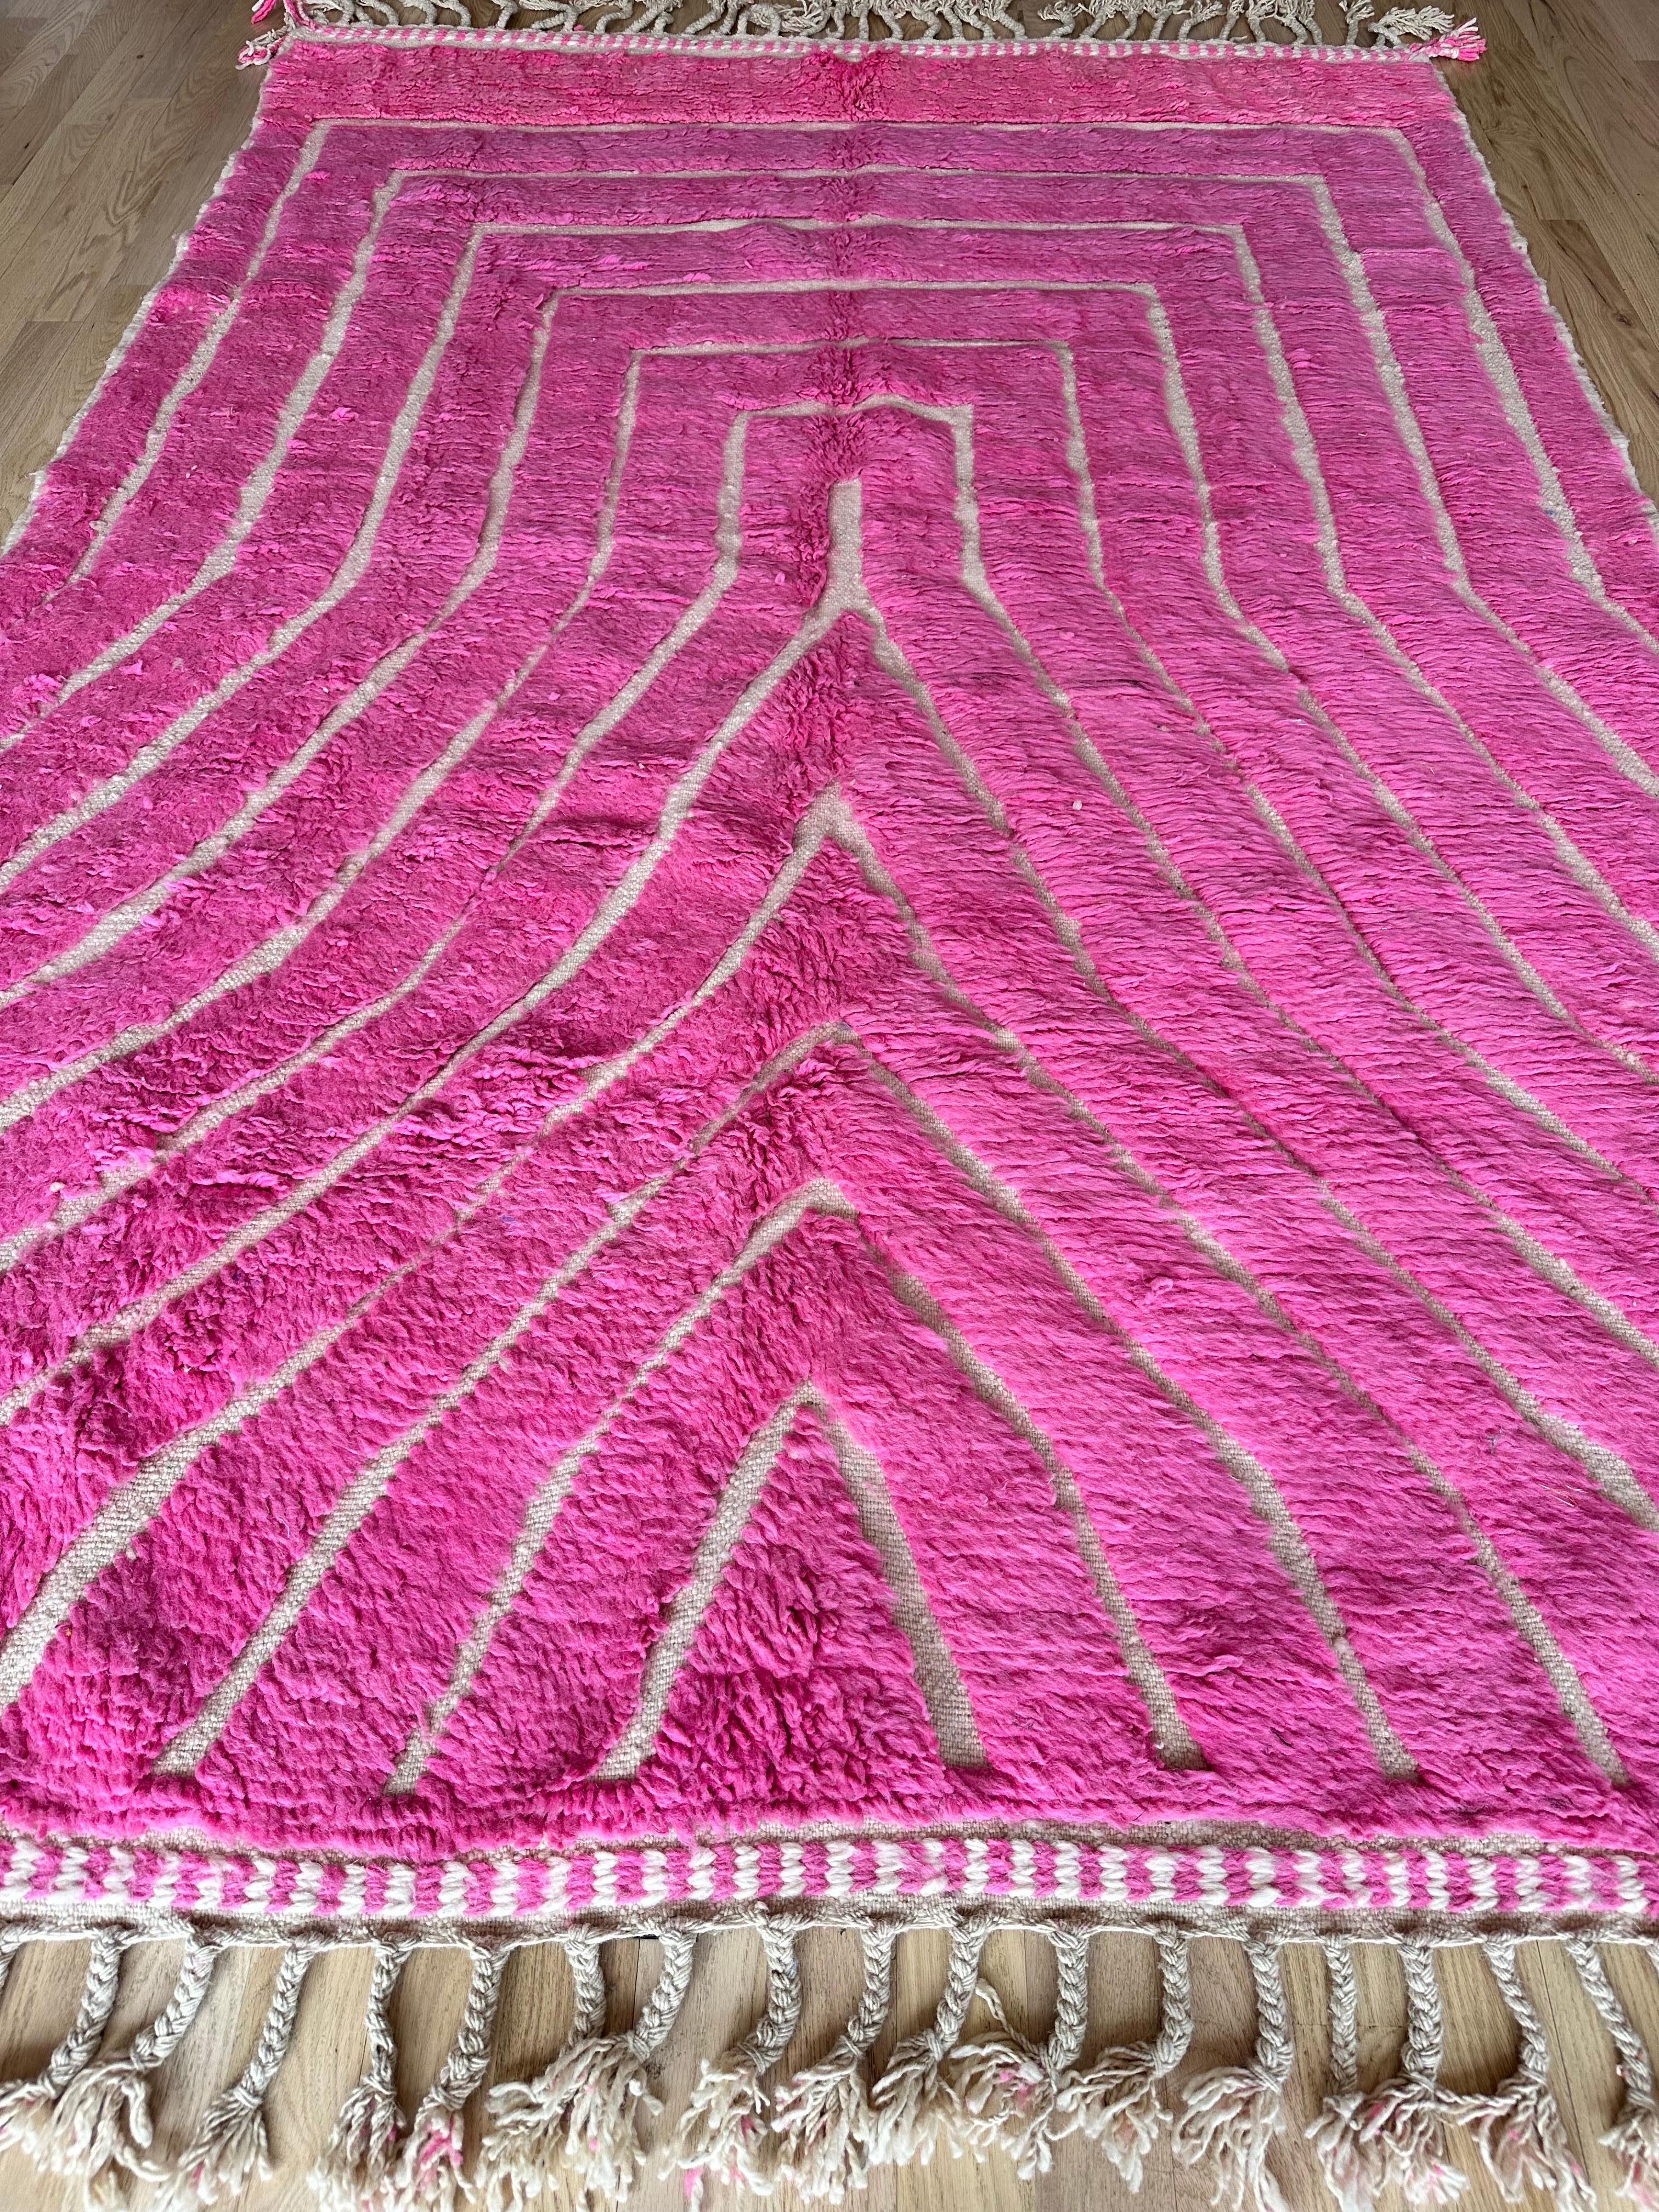 Vintage Moroccan Rug by Berber Tribes of Morocco, pink wool and cream color For Sale 2